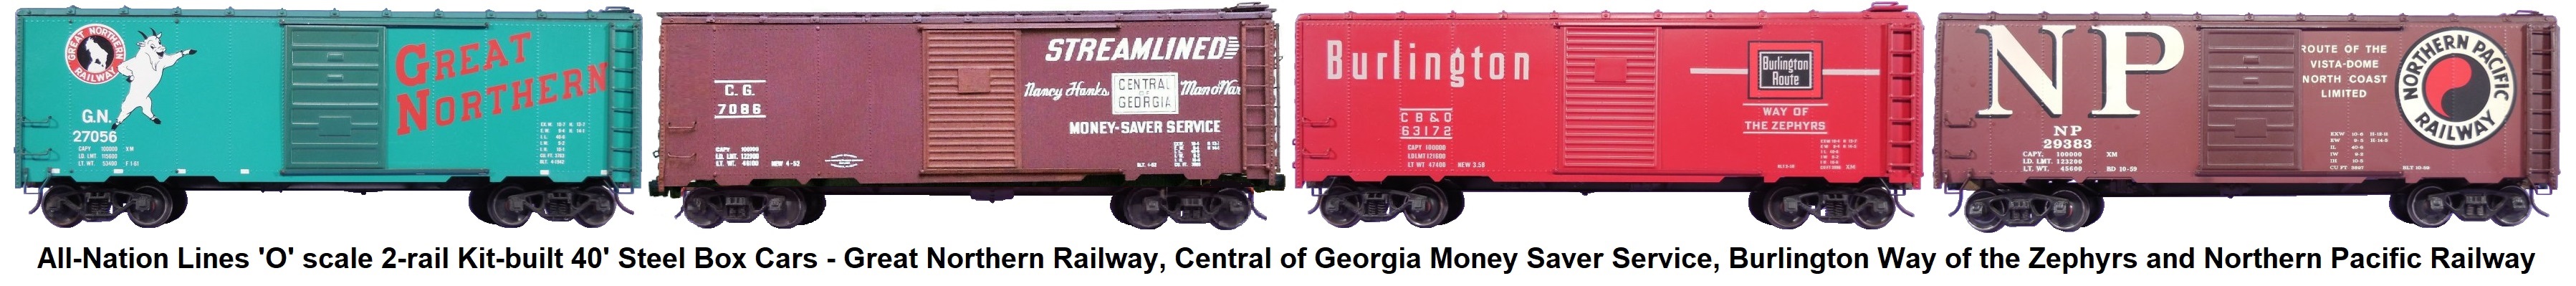 All-Nation 'O' scale 40' Steel Box Cars Kit-built into #6200 Great Northern, #6610 Central of Georgia, #3625 Burlington Northern and #3667 Northern Pacific Railway Liveries